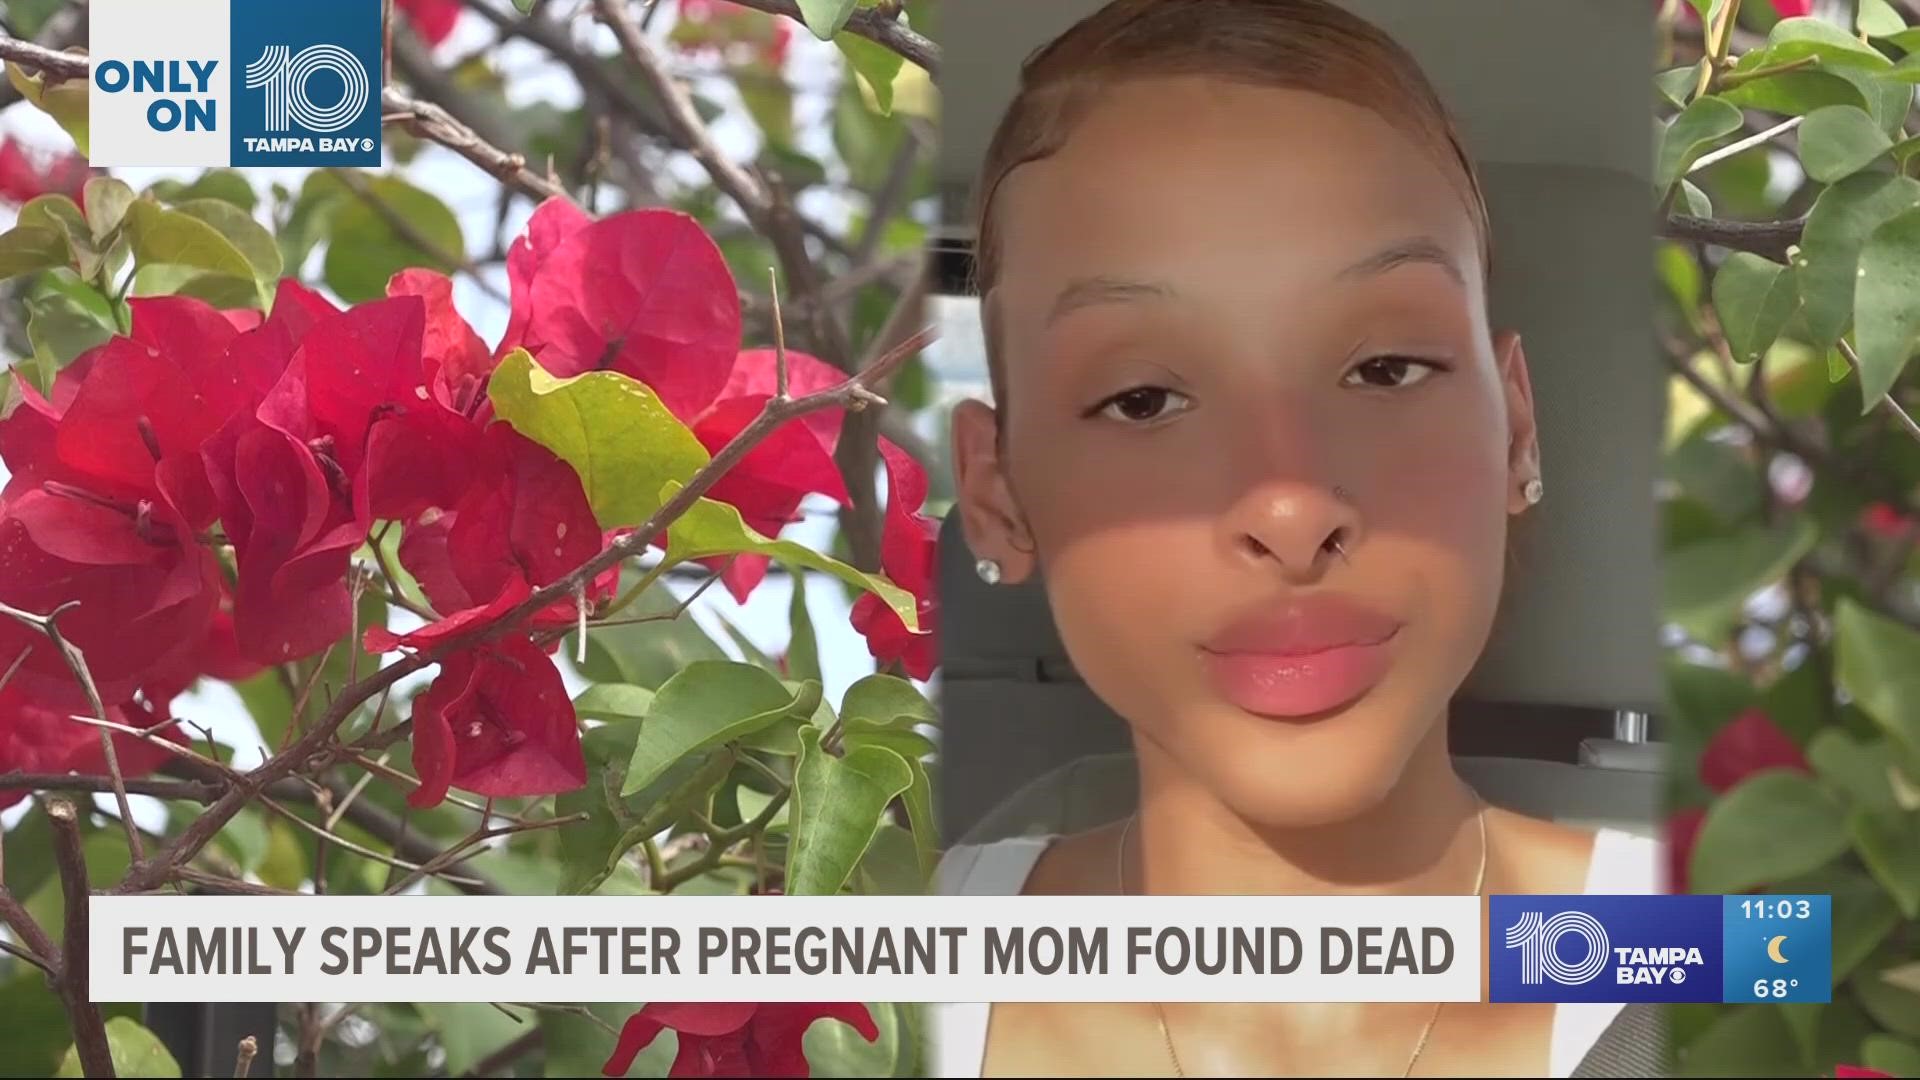 The family of Alana Sims said their hearts are broken after she was found dead Monday night.